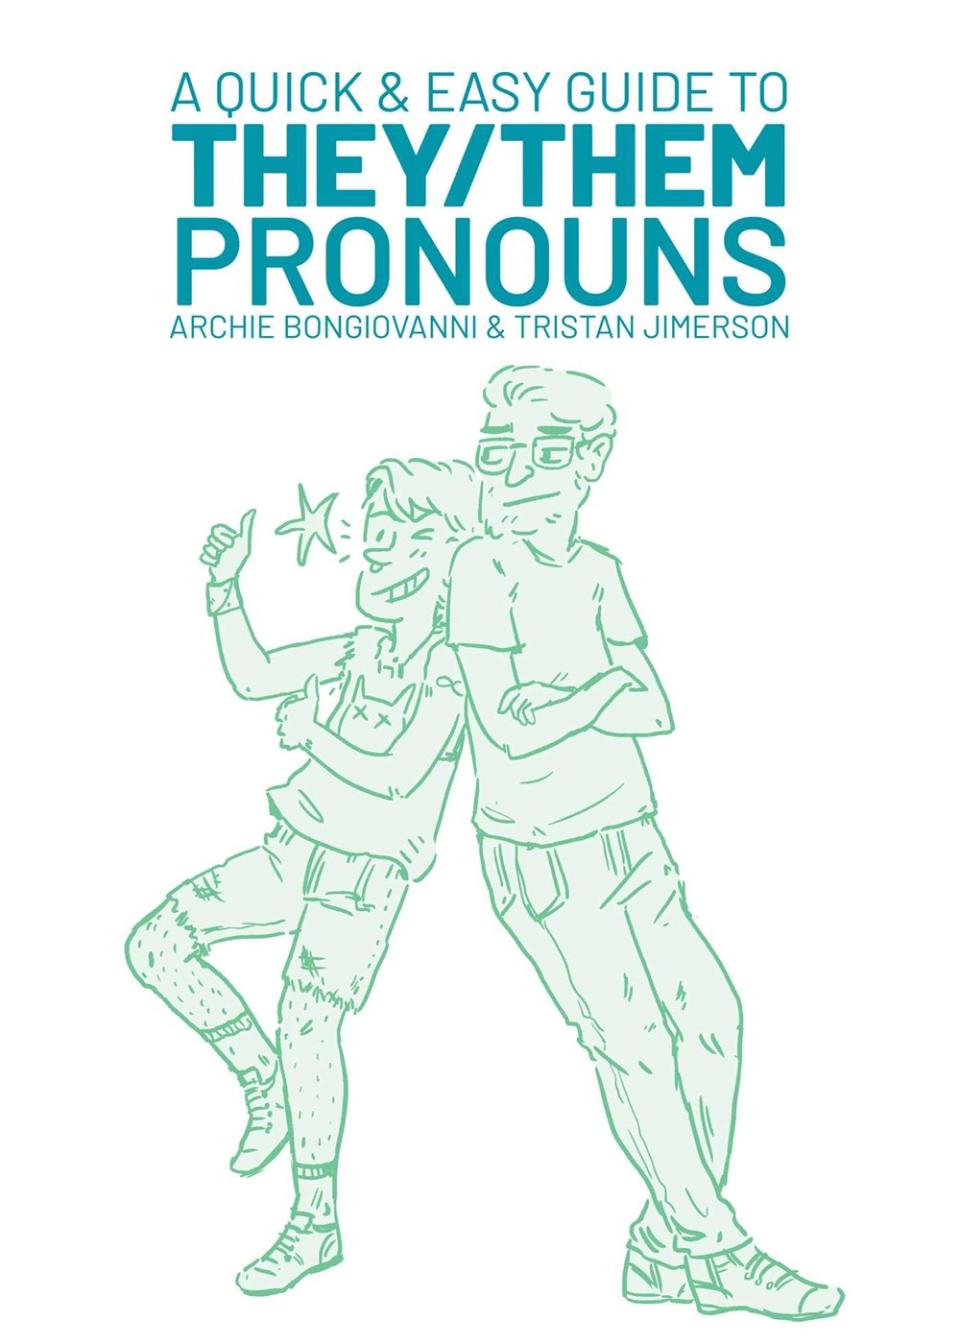 A Quick & Easy Guide to They/Them Pronouns - New Years Resolution Books